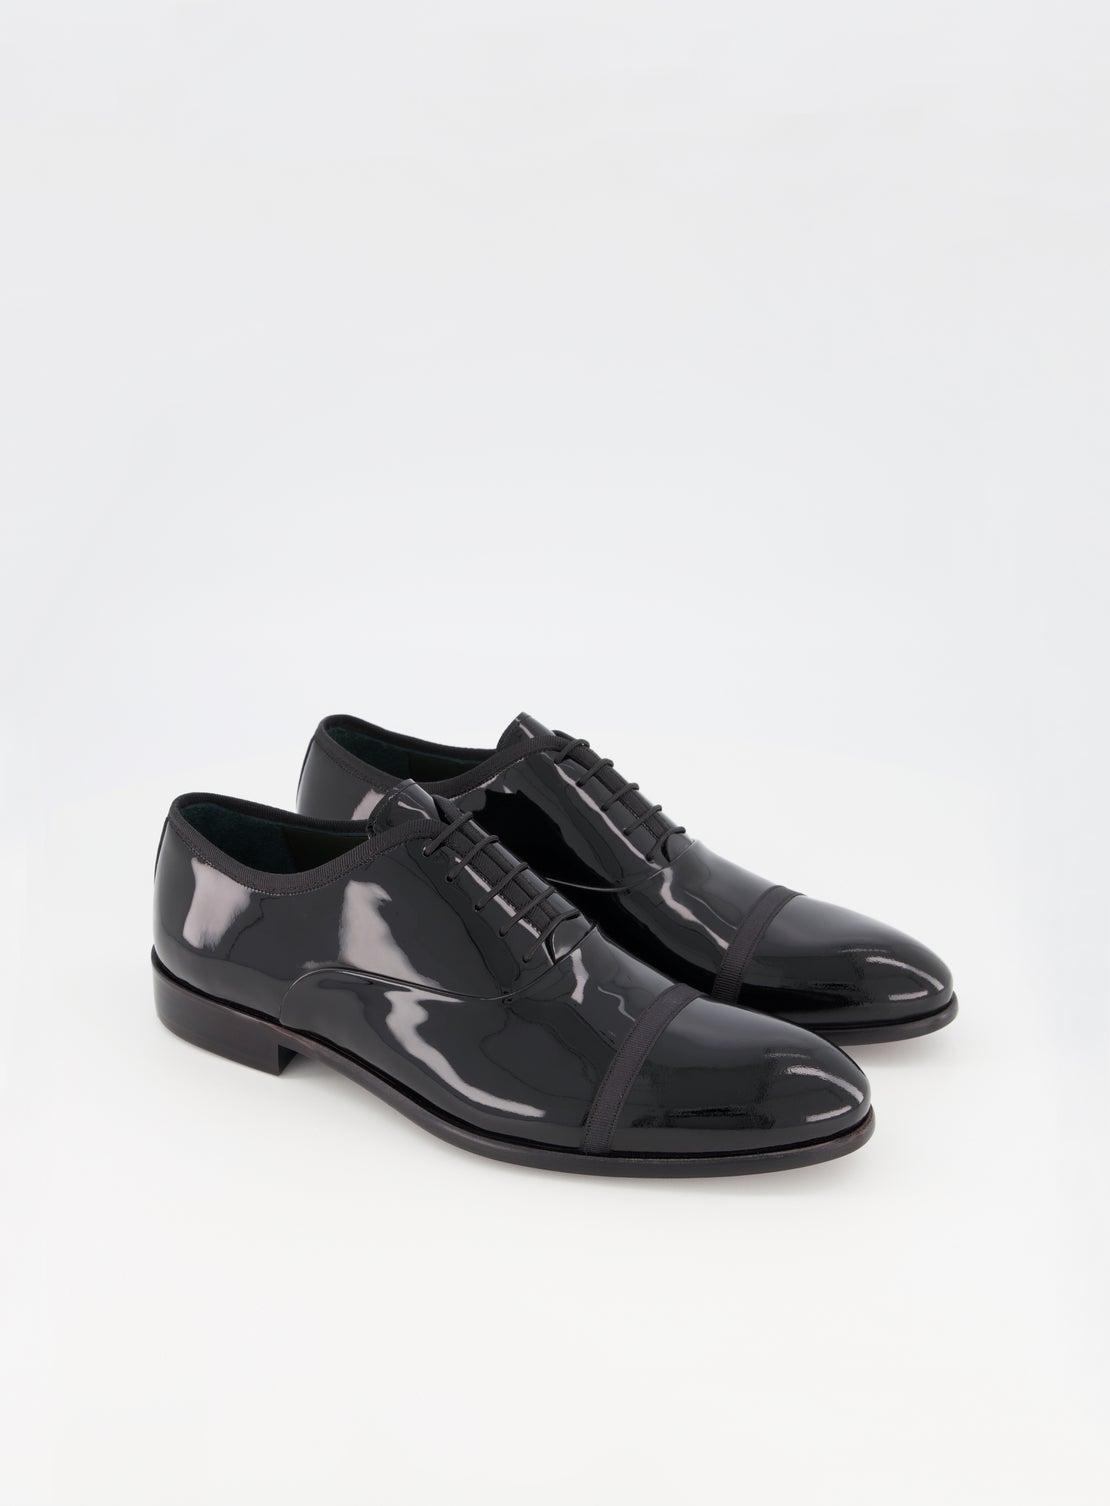 Stewart Black Patent leather Dinner Shoes